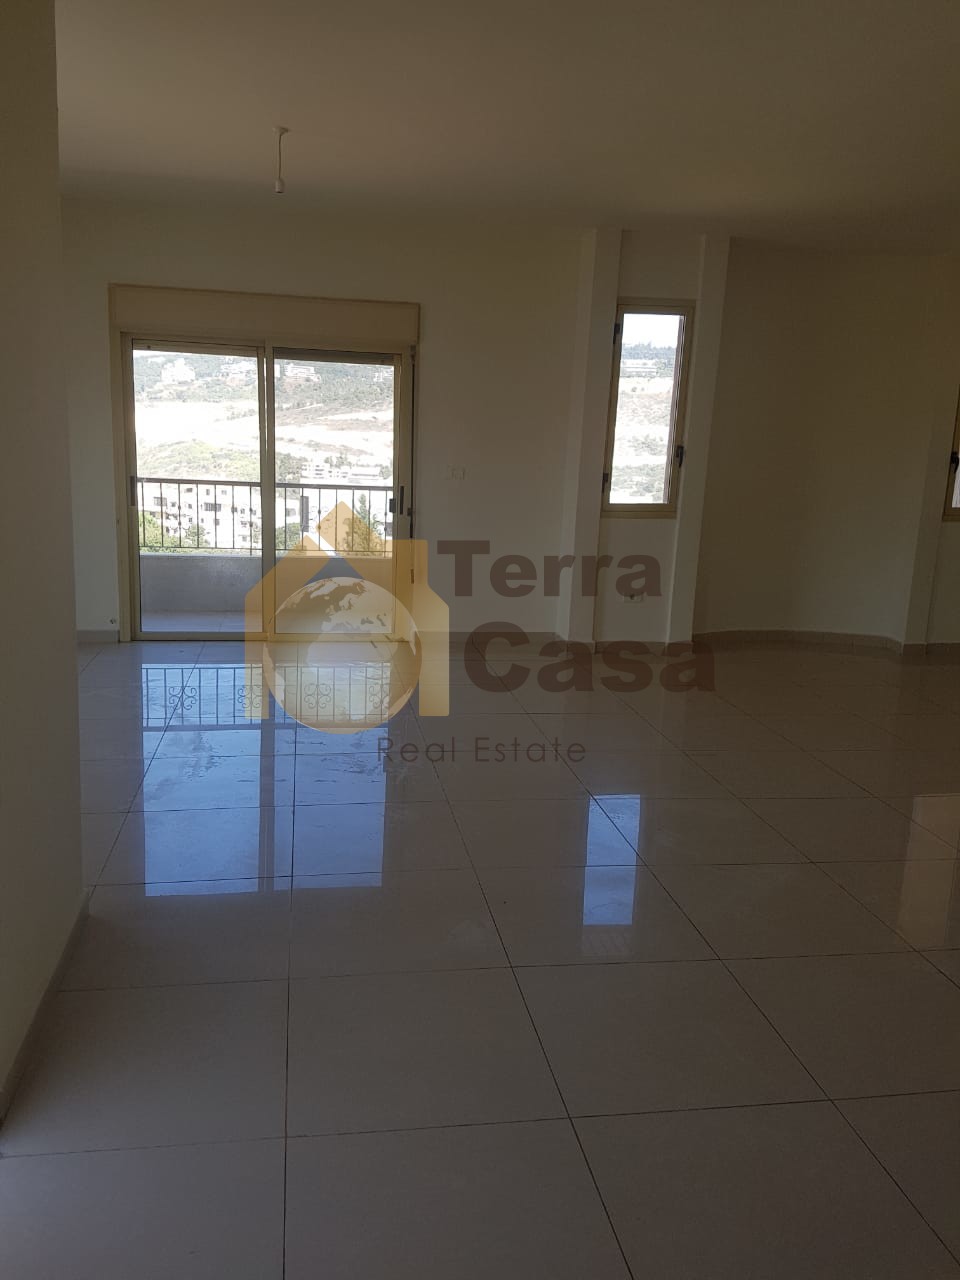 Apartment with open view nice location Ref# 1559